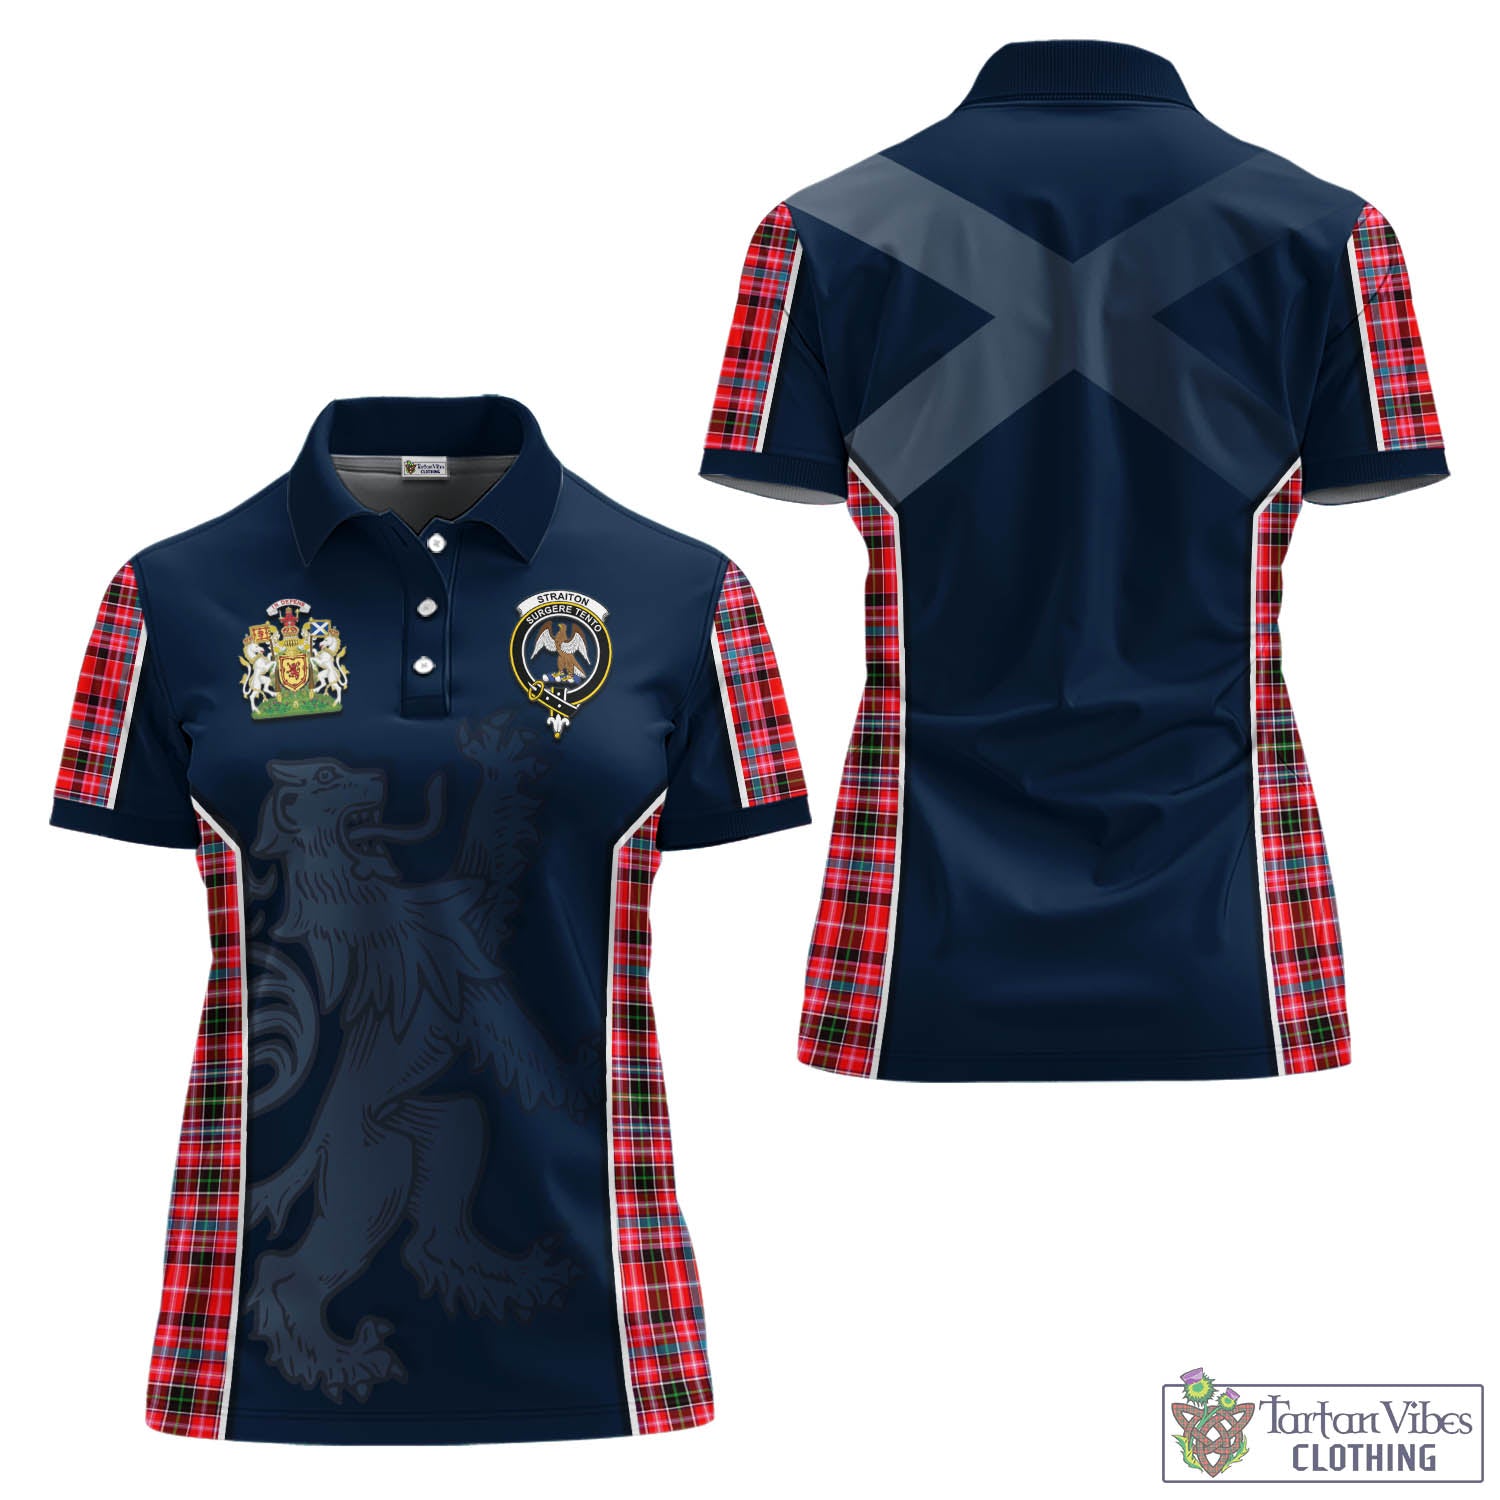 Tartan Vibes Clothing Straiton Tartan Women's Polo Shirt with Family Crest and Lion Rampant Vibes Sport Style